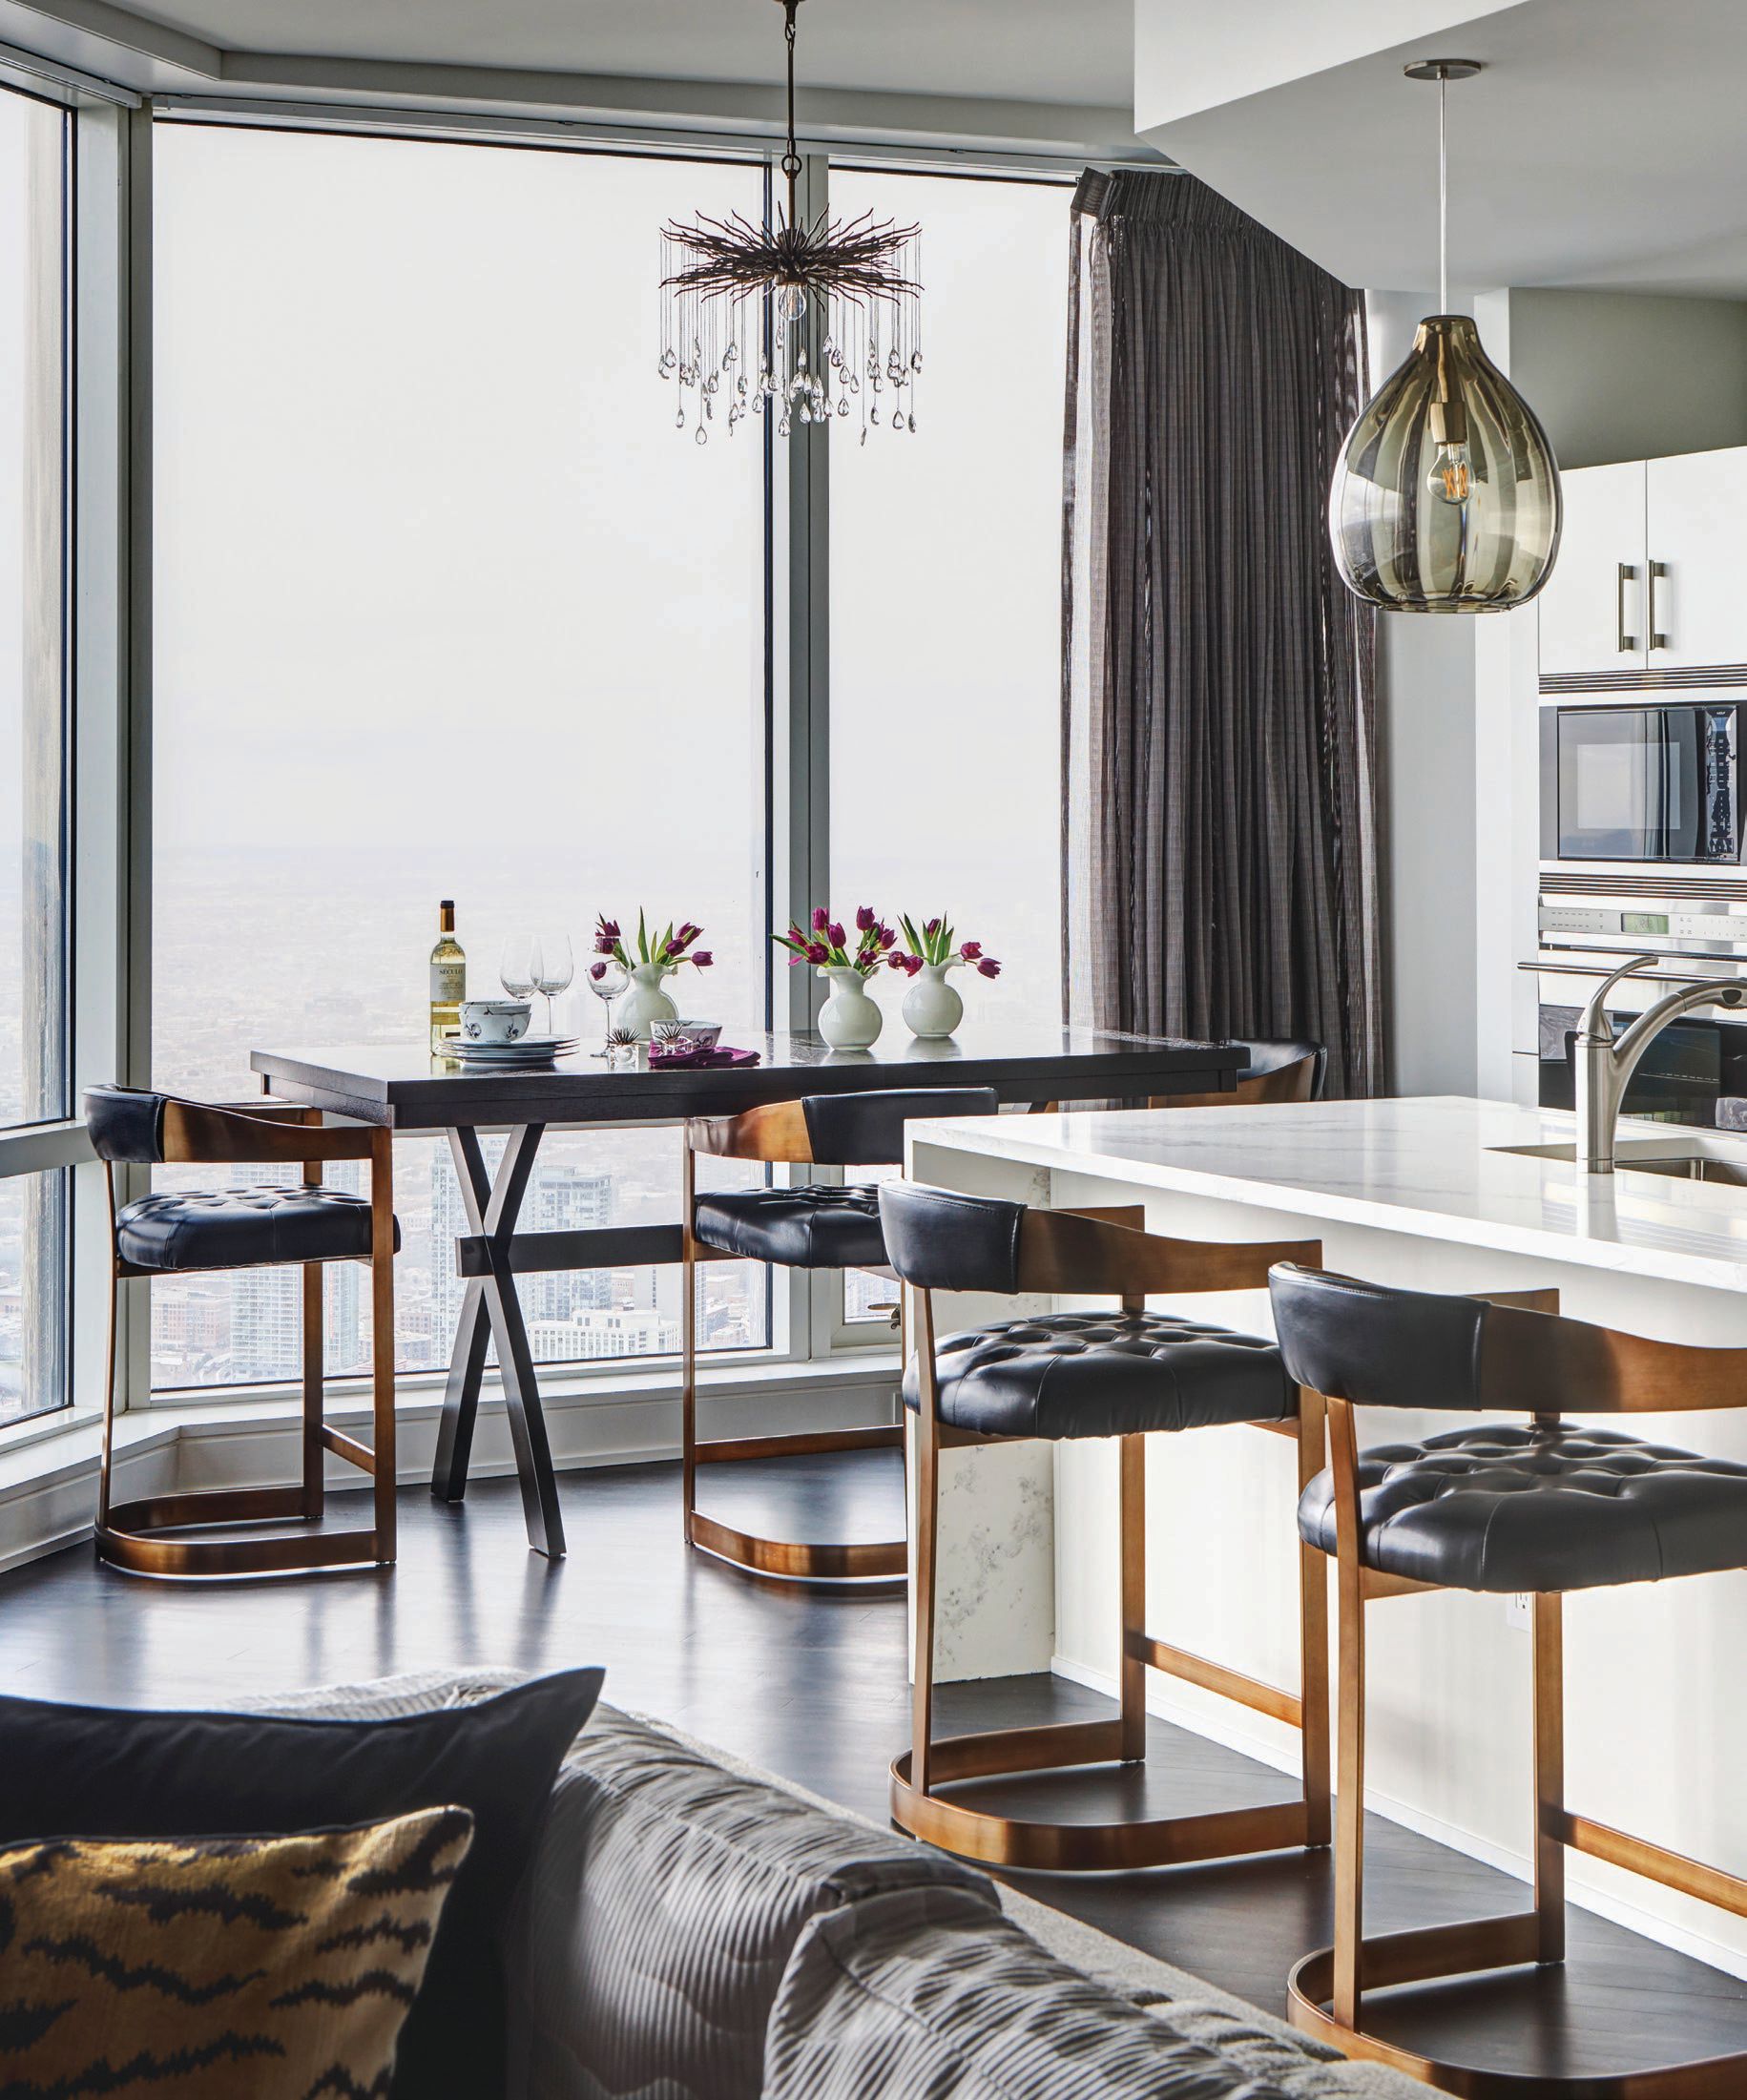 Gold-accented Sunpan counter stools add an elegant edge to the kitchen. PHOTOGRAPHED BY MICHAEL ALAN KASKEL